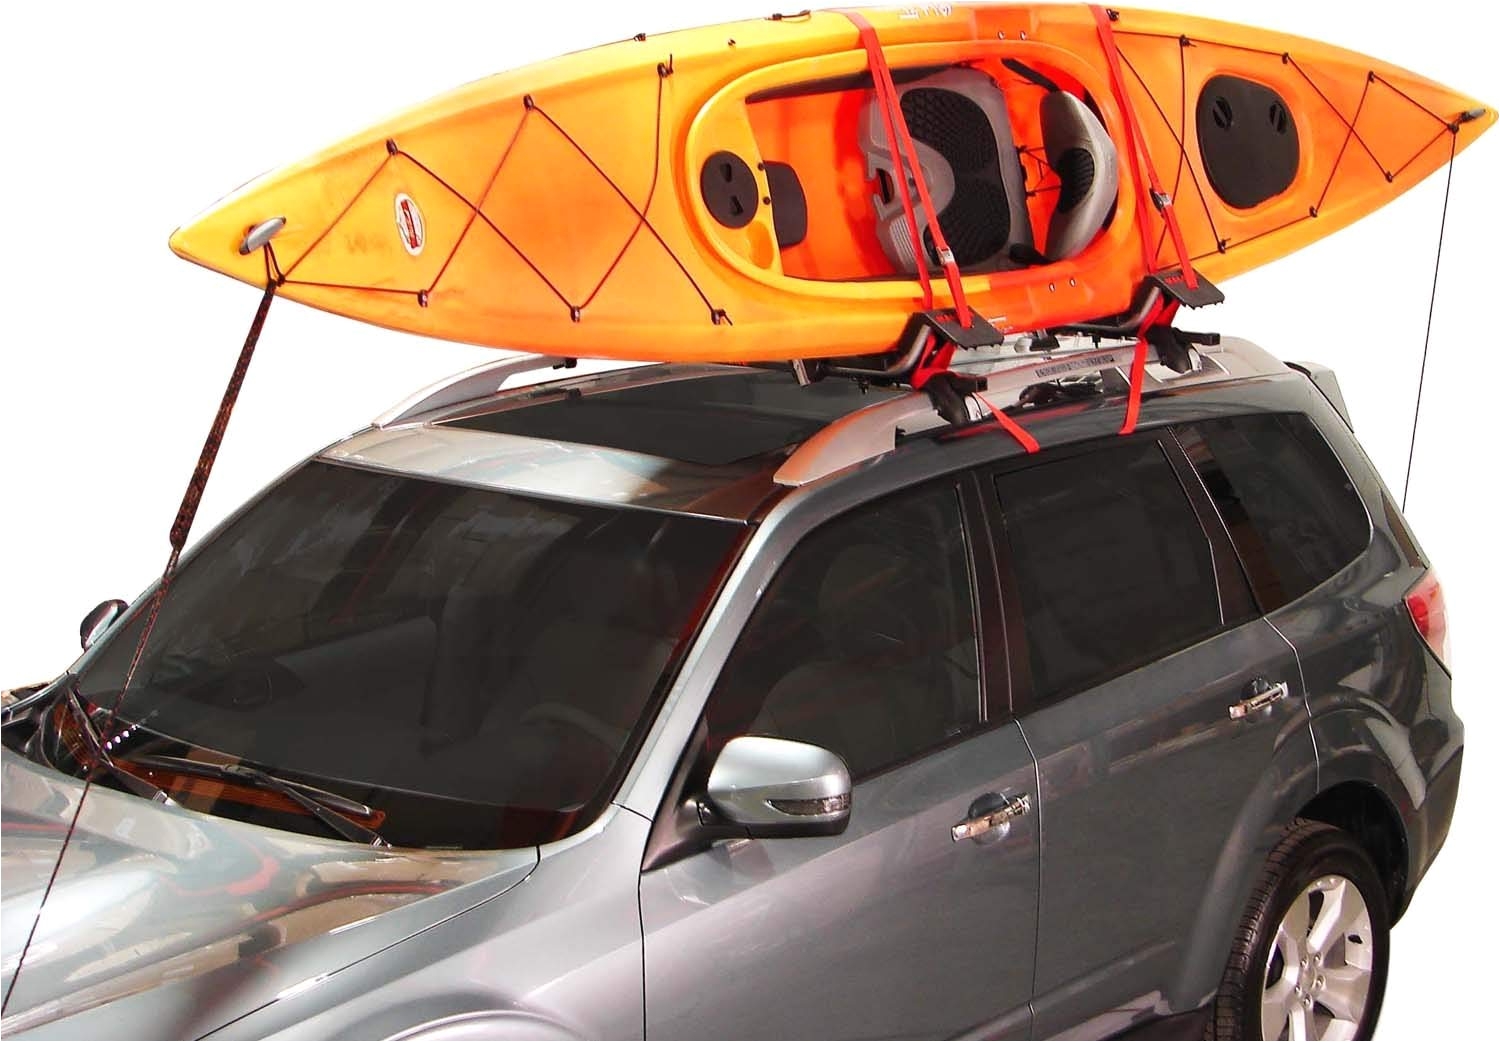 amazon com malone downloader folding j style universal car rack kayak carrier with bow and stern lines automotive kayak racks sports outdoors